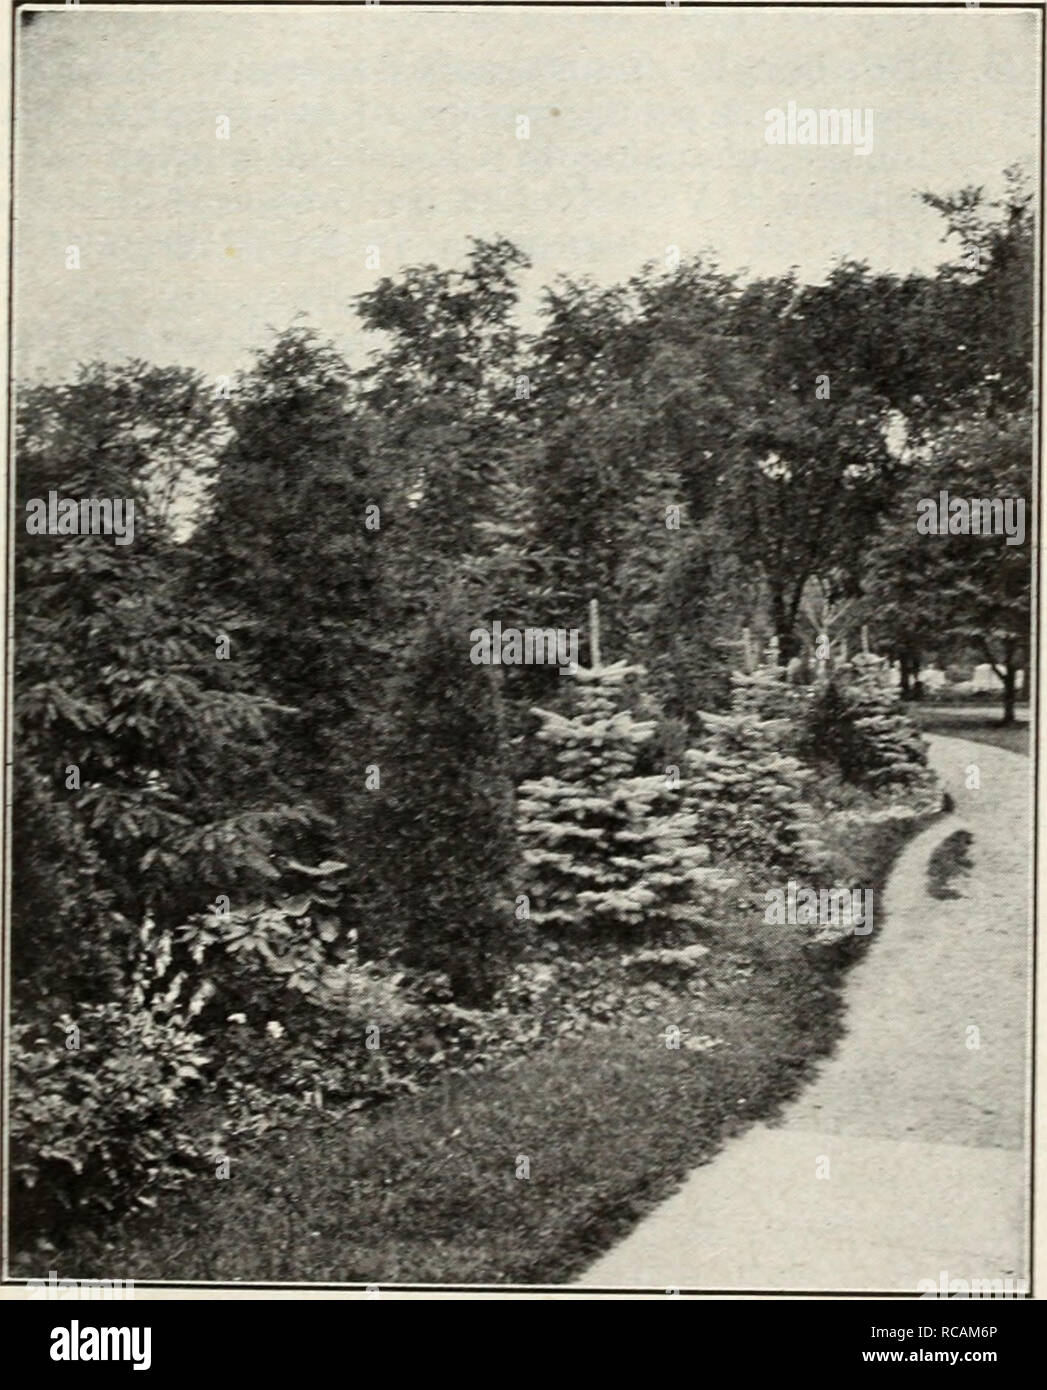 . Ellwanger &amp; Barry Mt Hope Nurseries 1916. Nurseries (Horticulture) Catalogs; Roses Seeds Catalogs; Strawberries Catalogs; Bulbs (Plants) Catalogs; Fruit Catalogs; Flowers Catalogs. RETINOSPORA-JAPANESE CYPRESS-Continued R. pisifera. PEA-FRnTZD Cypress. Bright green pendulous branches. 2 to 2^ 2 ^-j -Sl.oO each. var. aurea. Rich golden yellow. Very distinct. 2 to 21 9 ft., 81.50 each. R. plumosa. Foliage bright green. A beautiful evergreen. 2 to 2^2 ft-, 81.25 each. var. aurea. Golden-branched; compact, upright habit. One of the most popular. 2 to 2^2 ft-&gt; $1.50 each. R. squarrosa. Fol Stock Photo